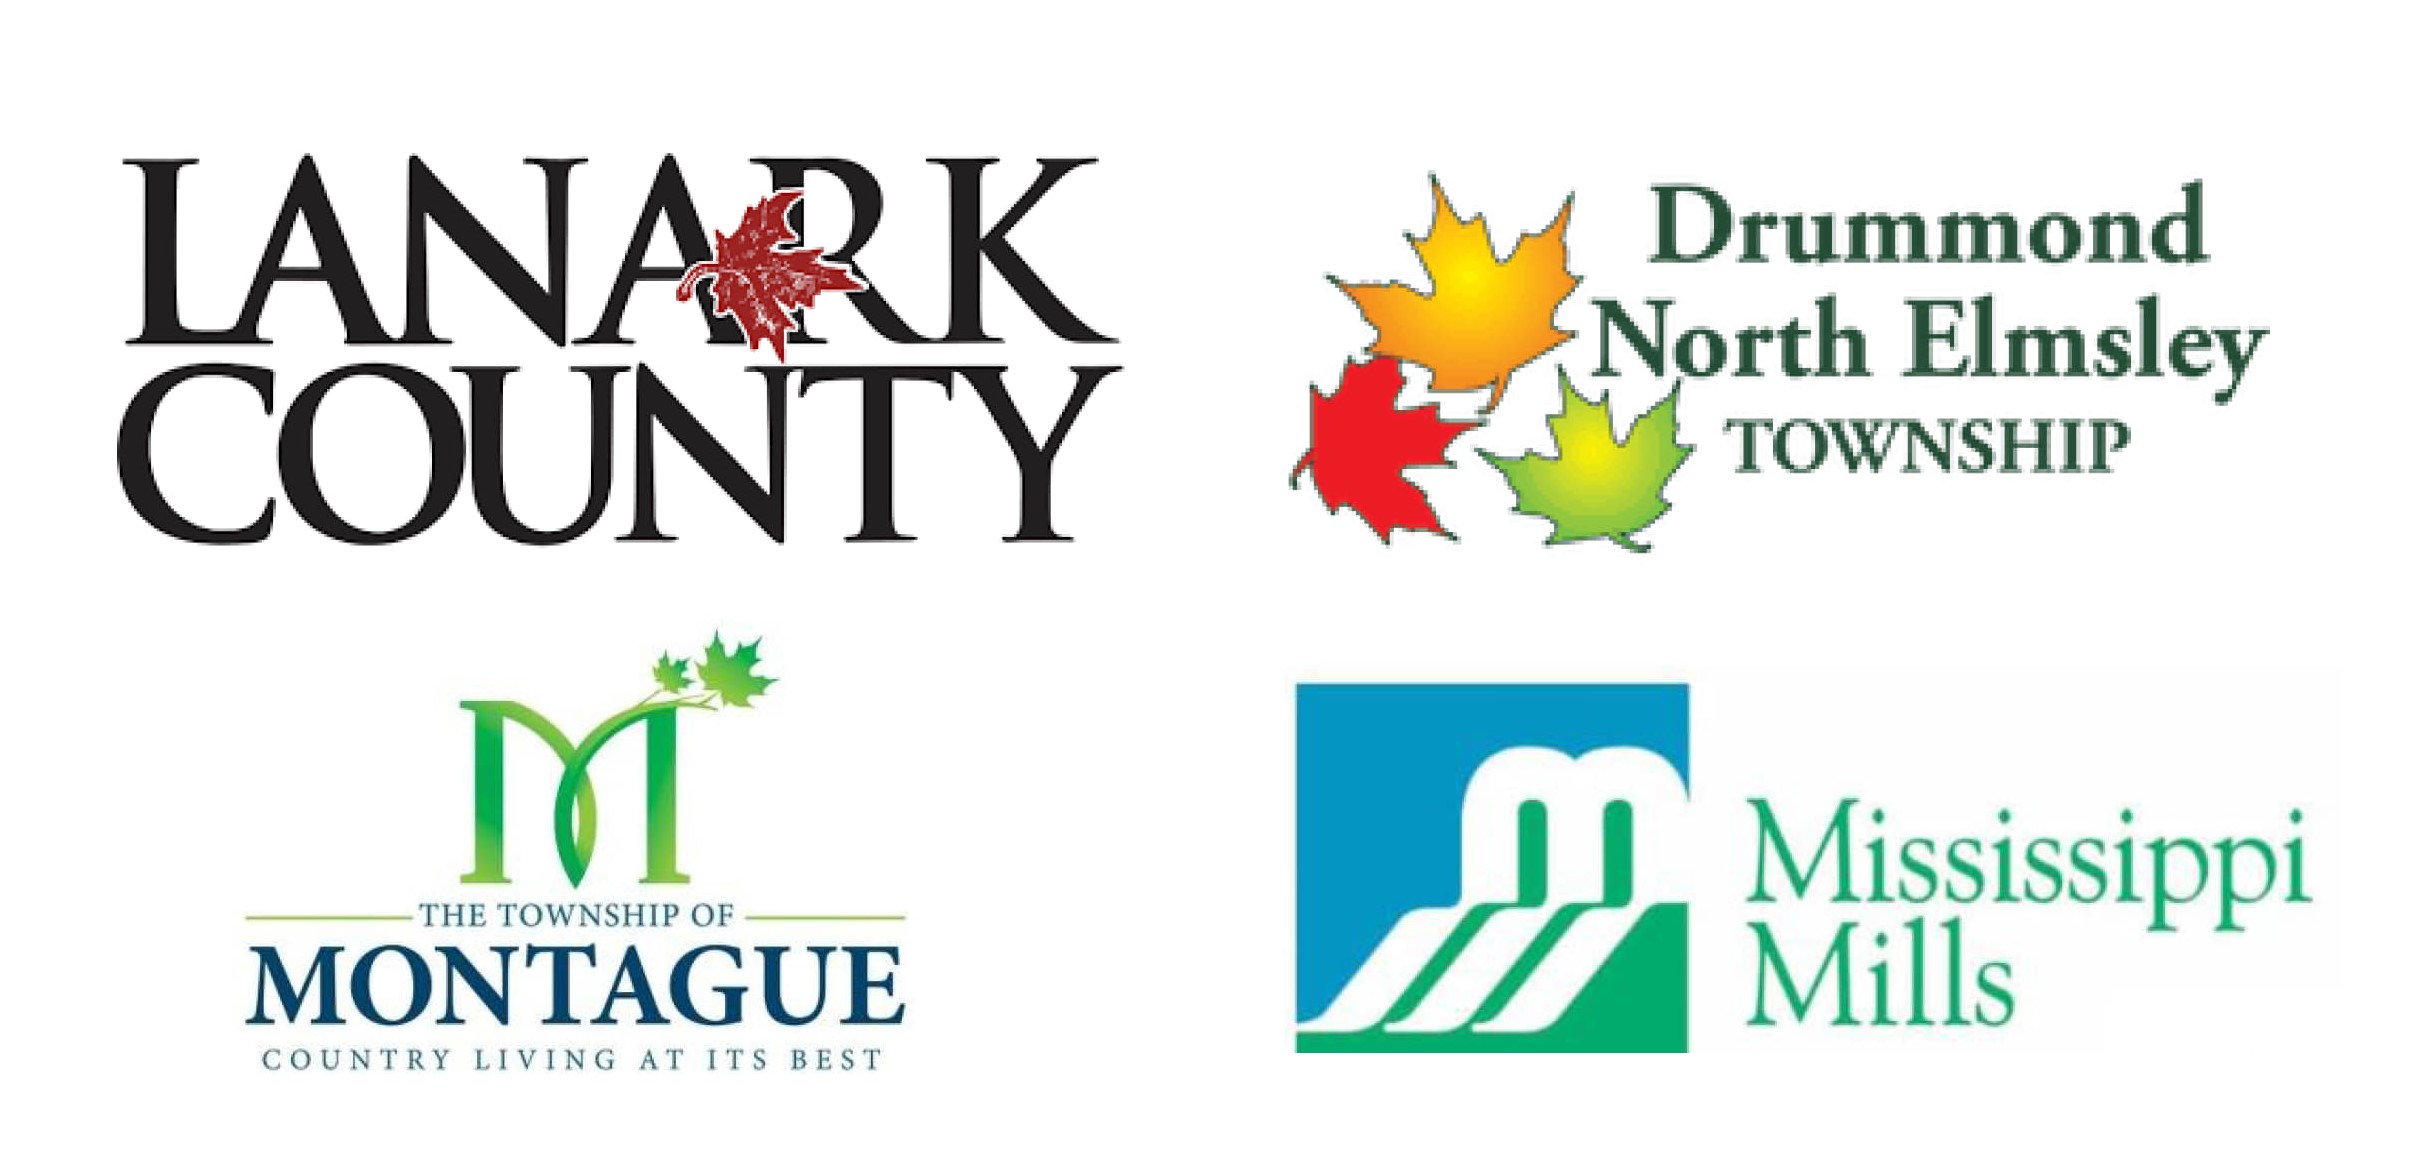 Logos of municipalities including Lanark County, Drummond/North Elmsley, Montague and Mississippi Mills